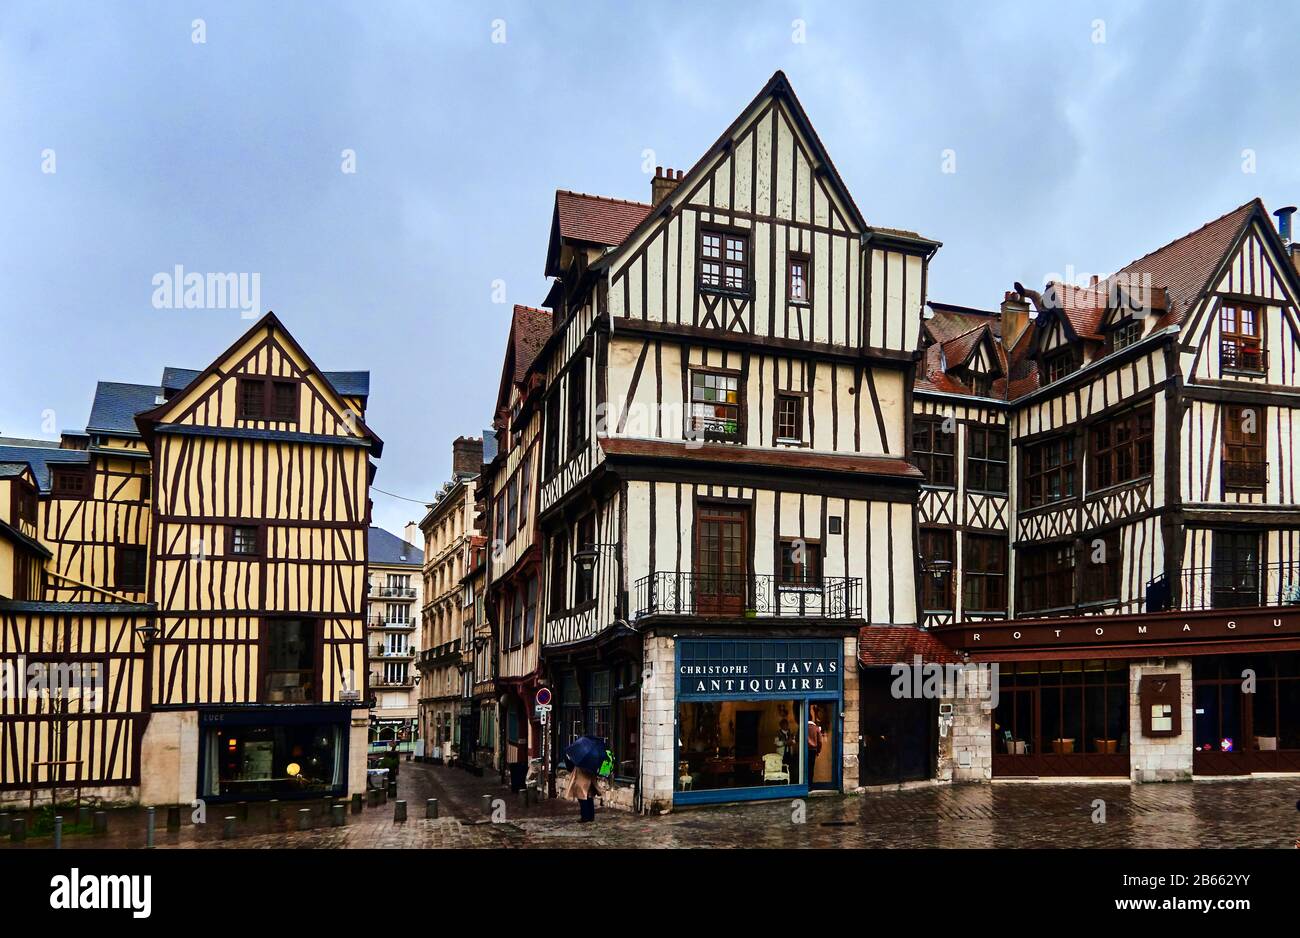 Small Medieval Streets of Rouen, France on a cloudy spring day. The city is the capital of the Normandy region of France and known for its half-timbered buildings. Stock Photo